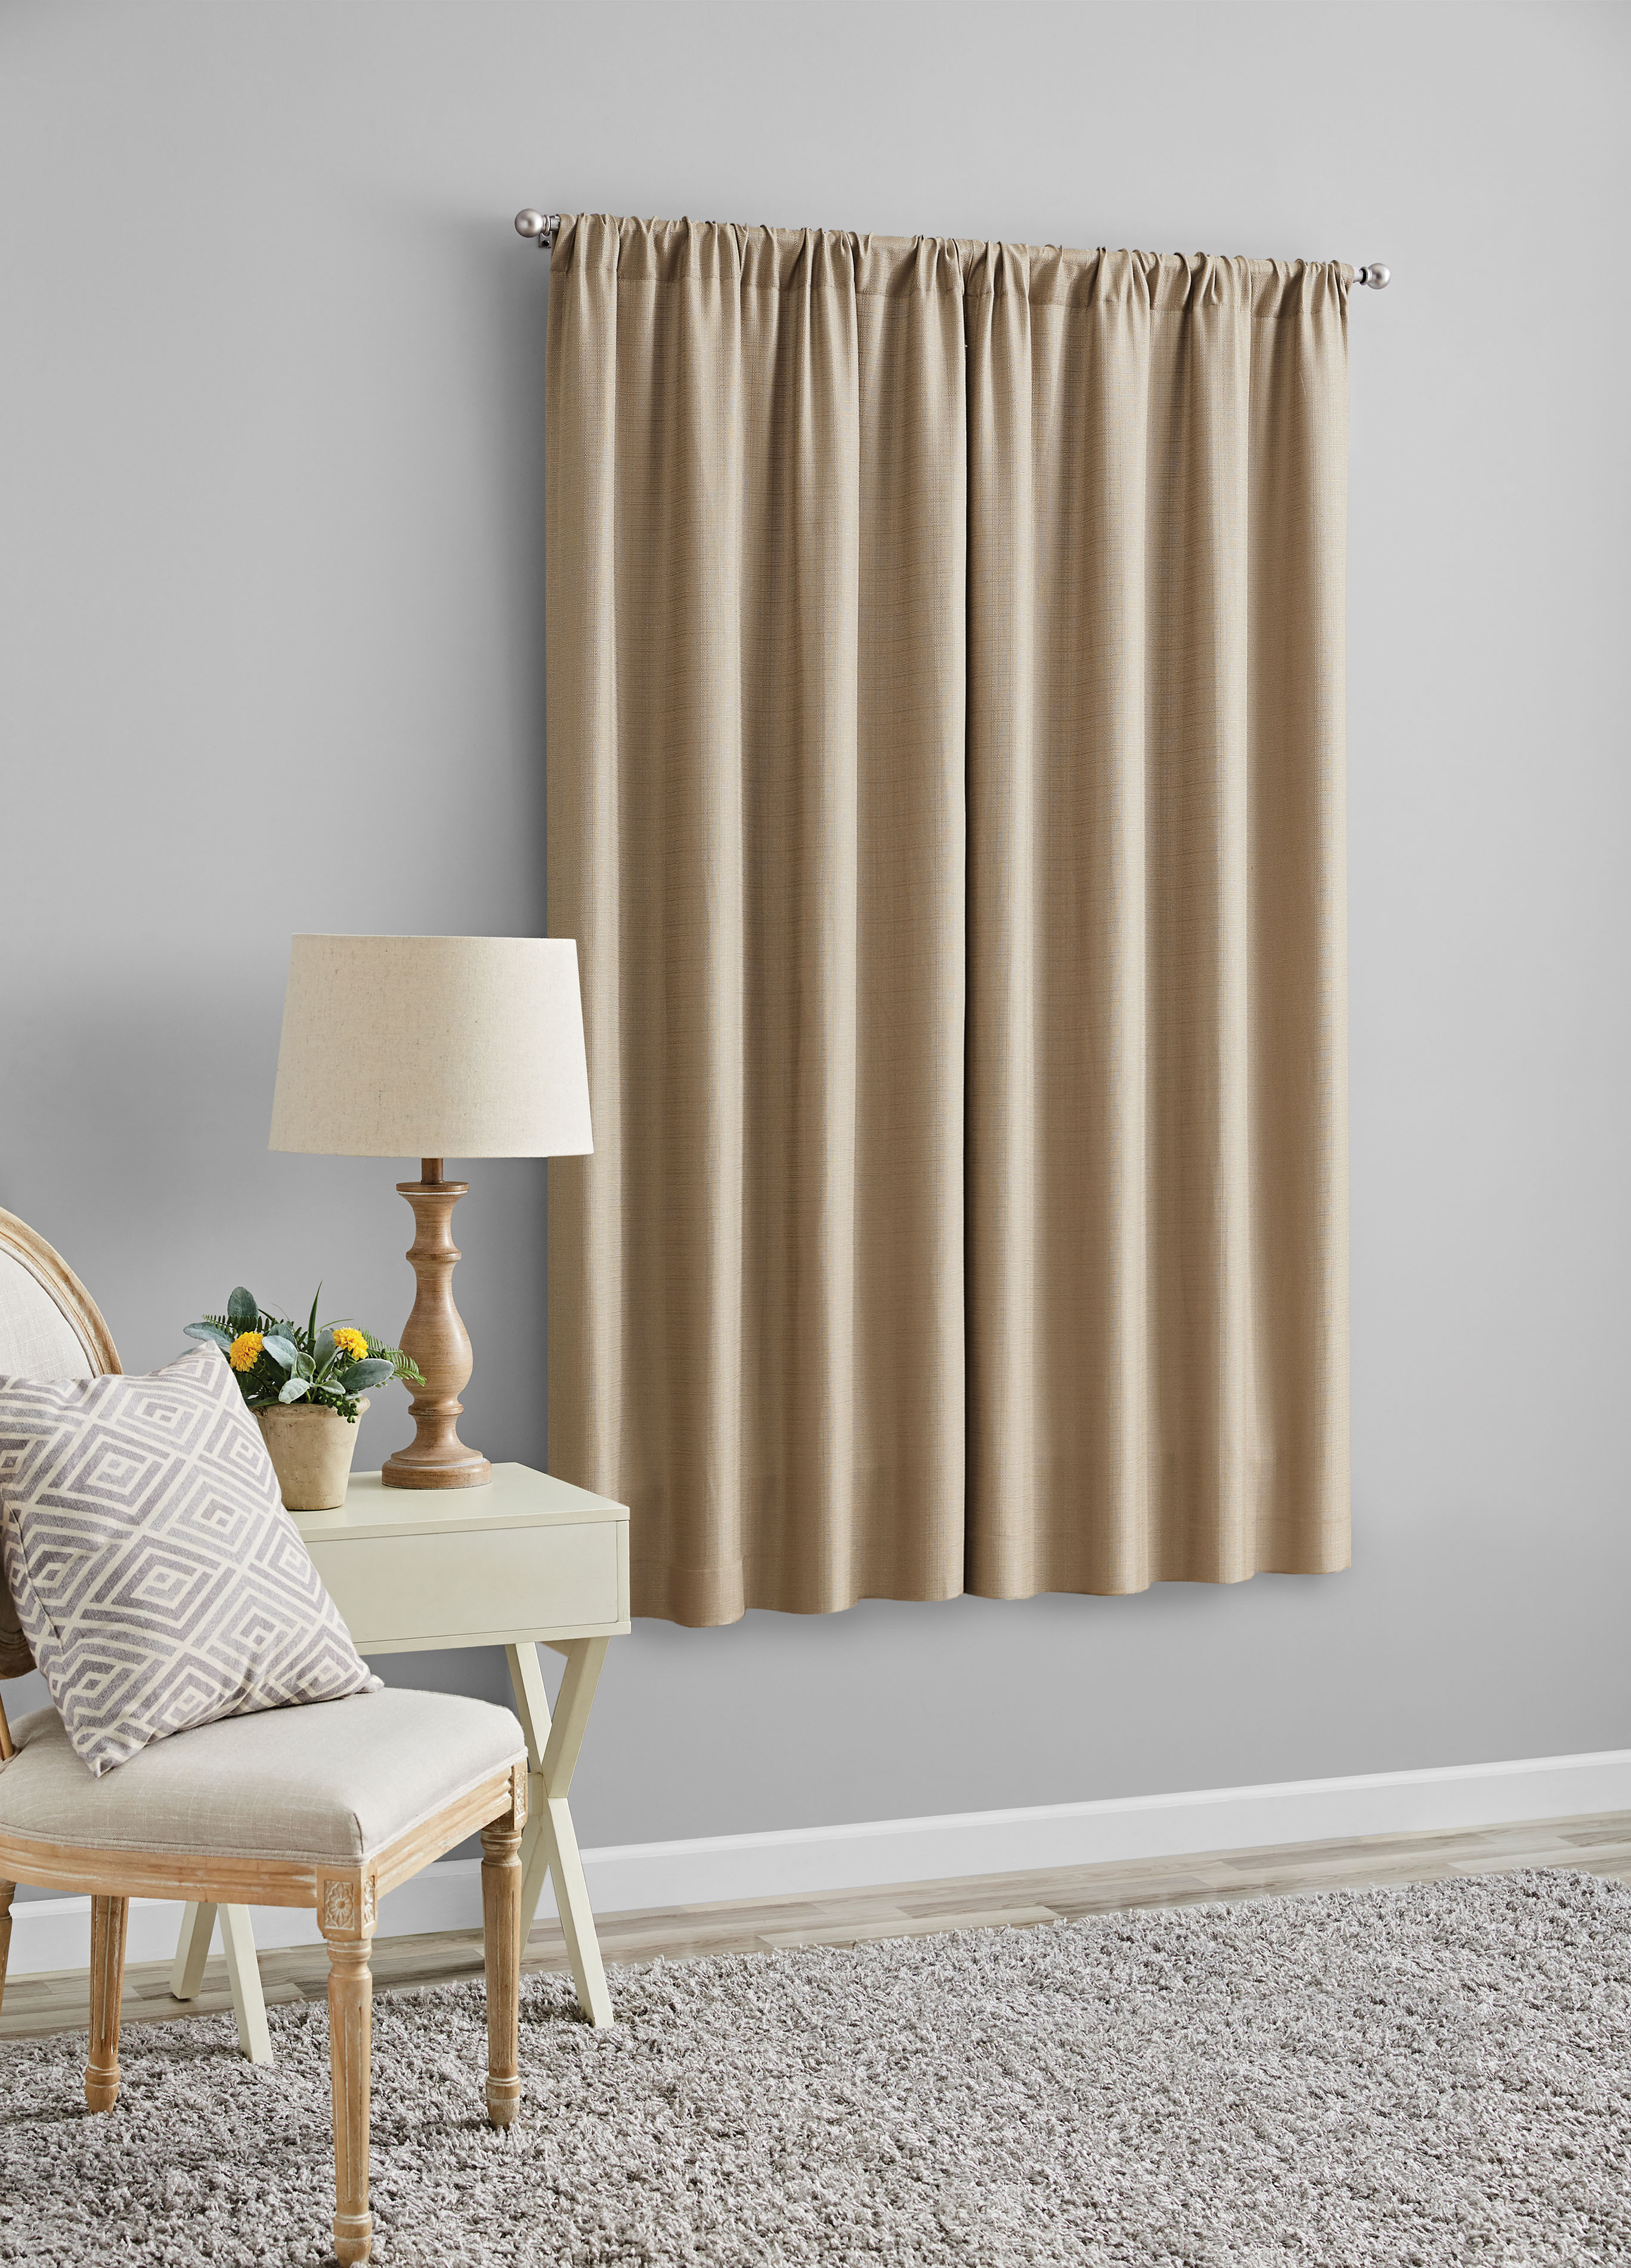 Mainstays Southport Beige Solid Color Light Filtering Rod Pocket Curtain Panel Pair, 40" x 63" - image 2 of 9